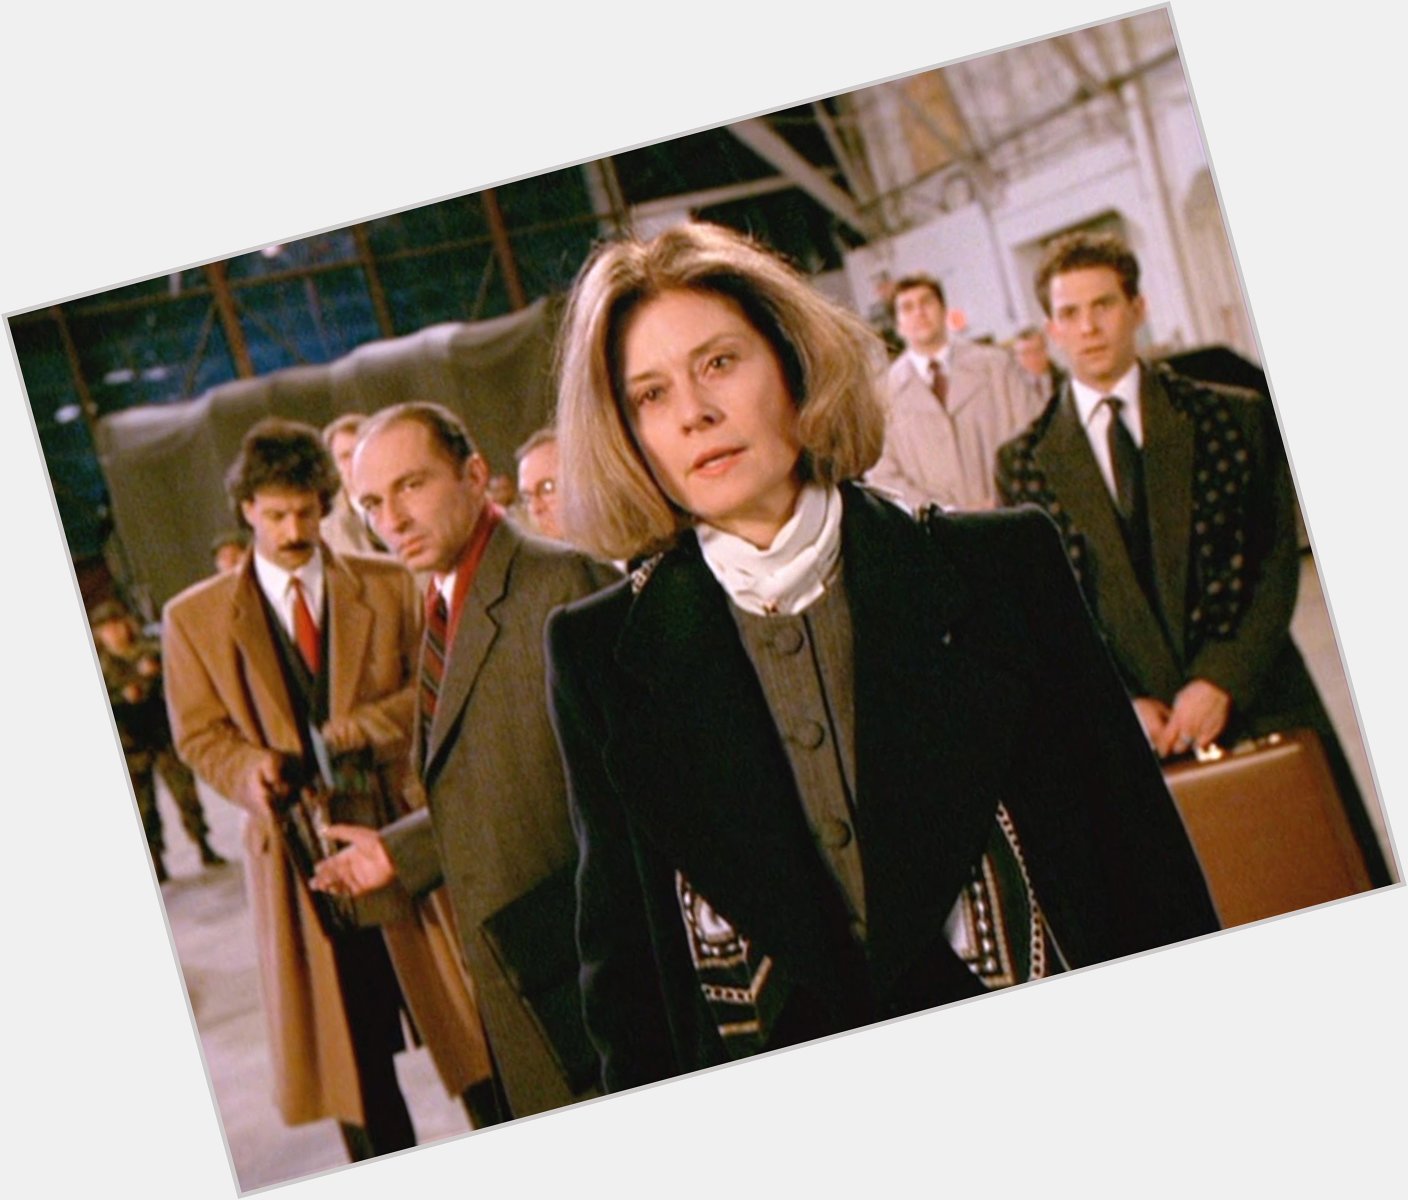 Happy Birthday to Diane Baker, here in THE SILENCE OF THE LAMBS! 